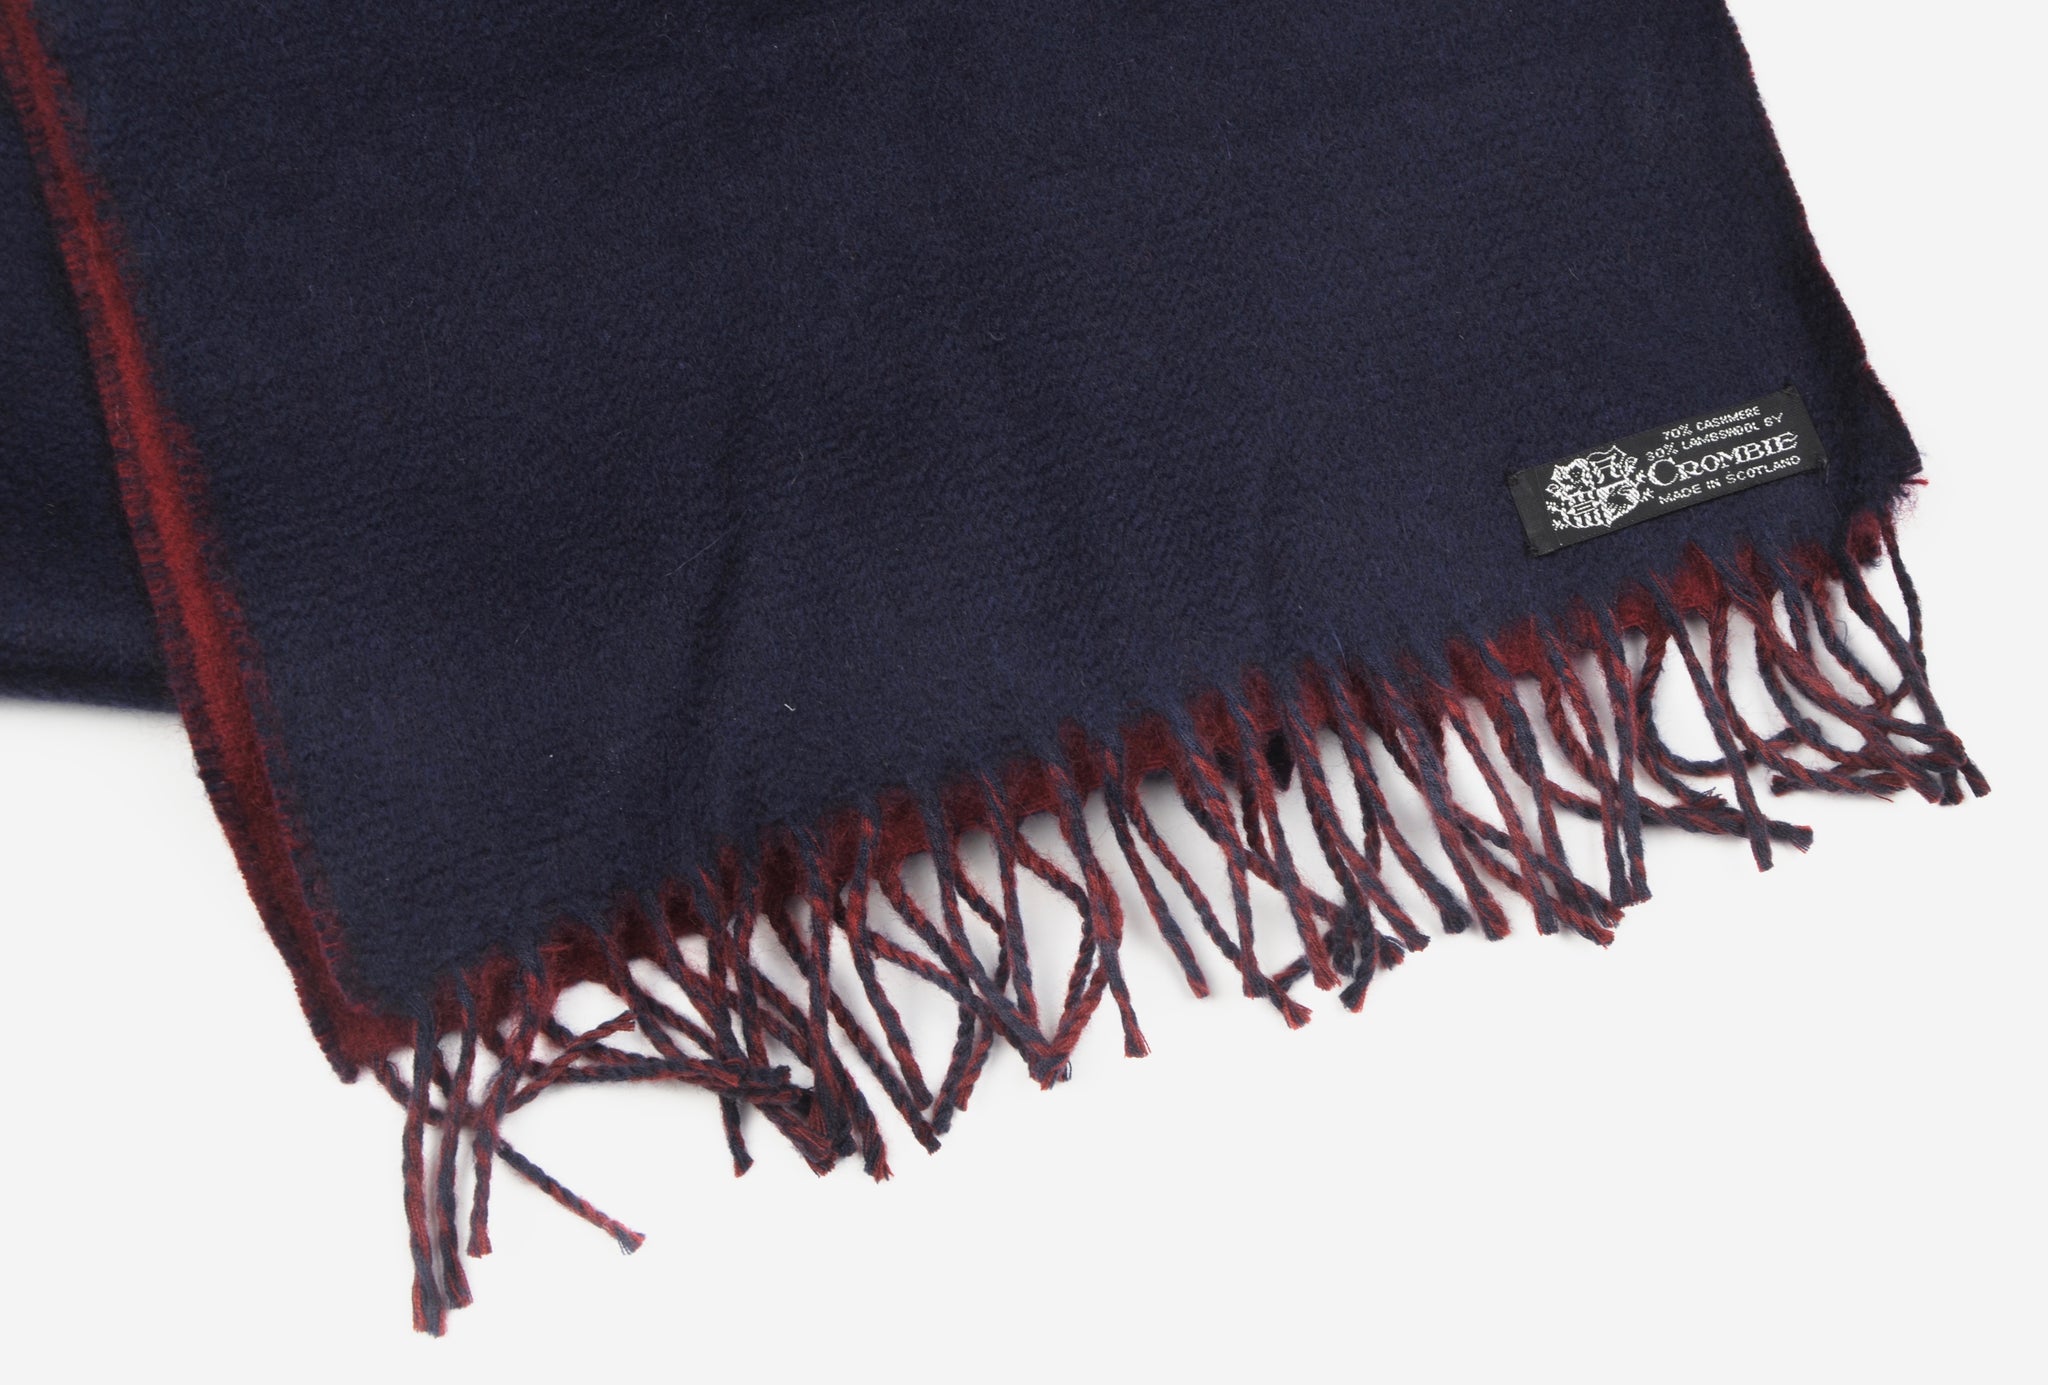 navy and burgundy scarf